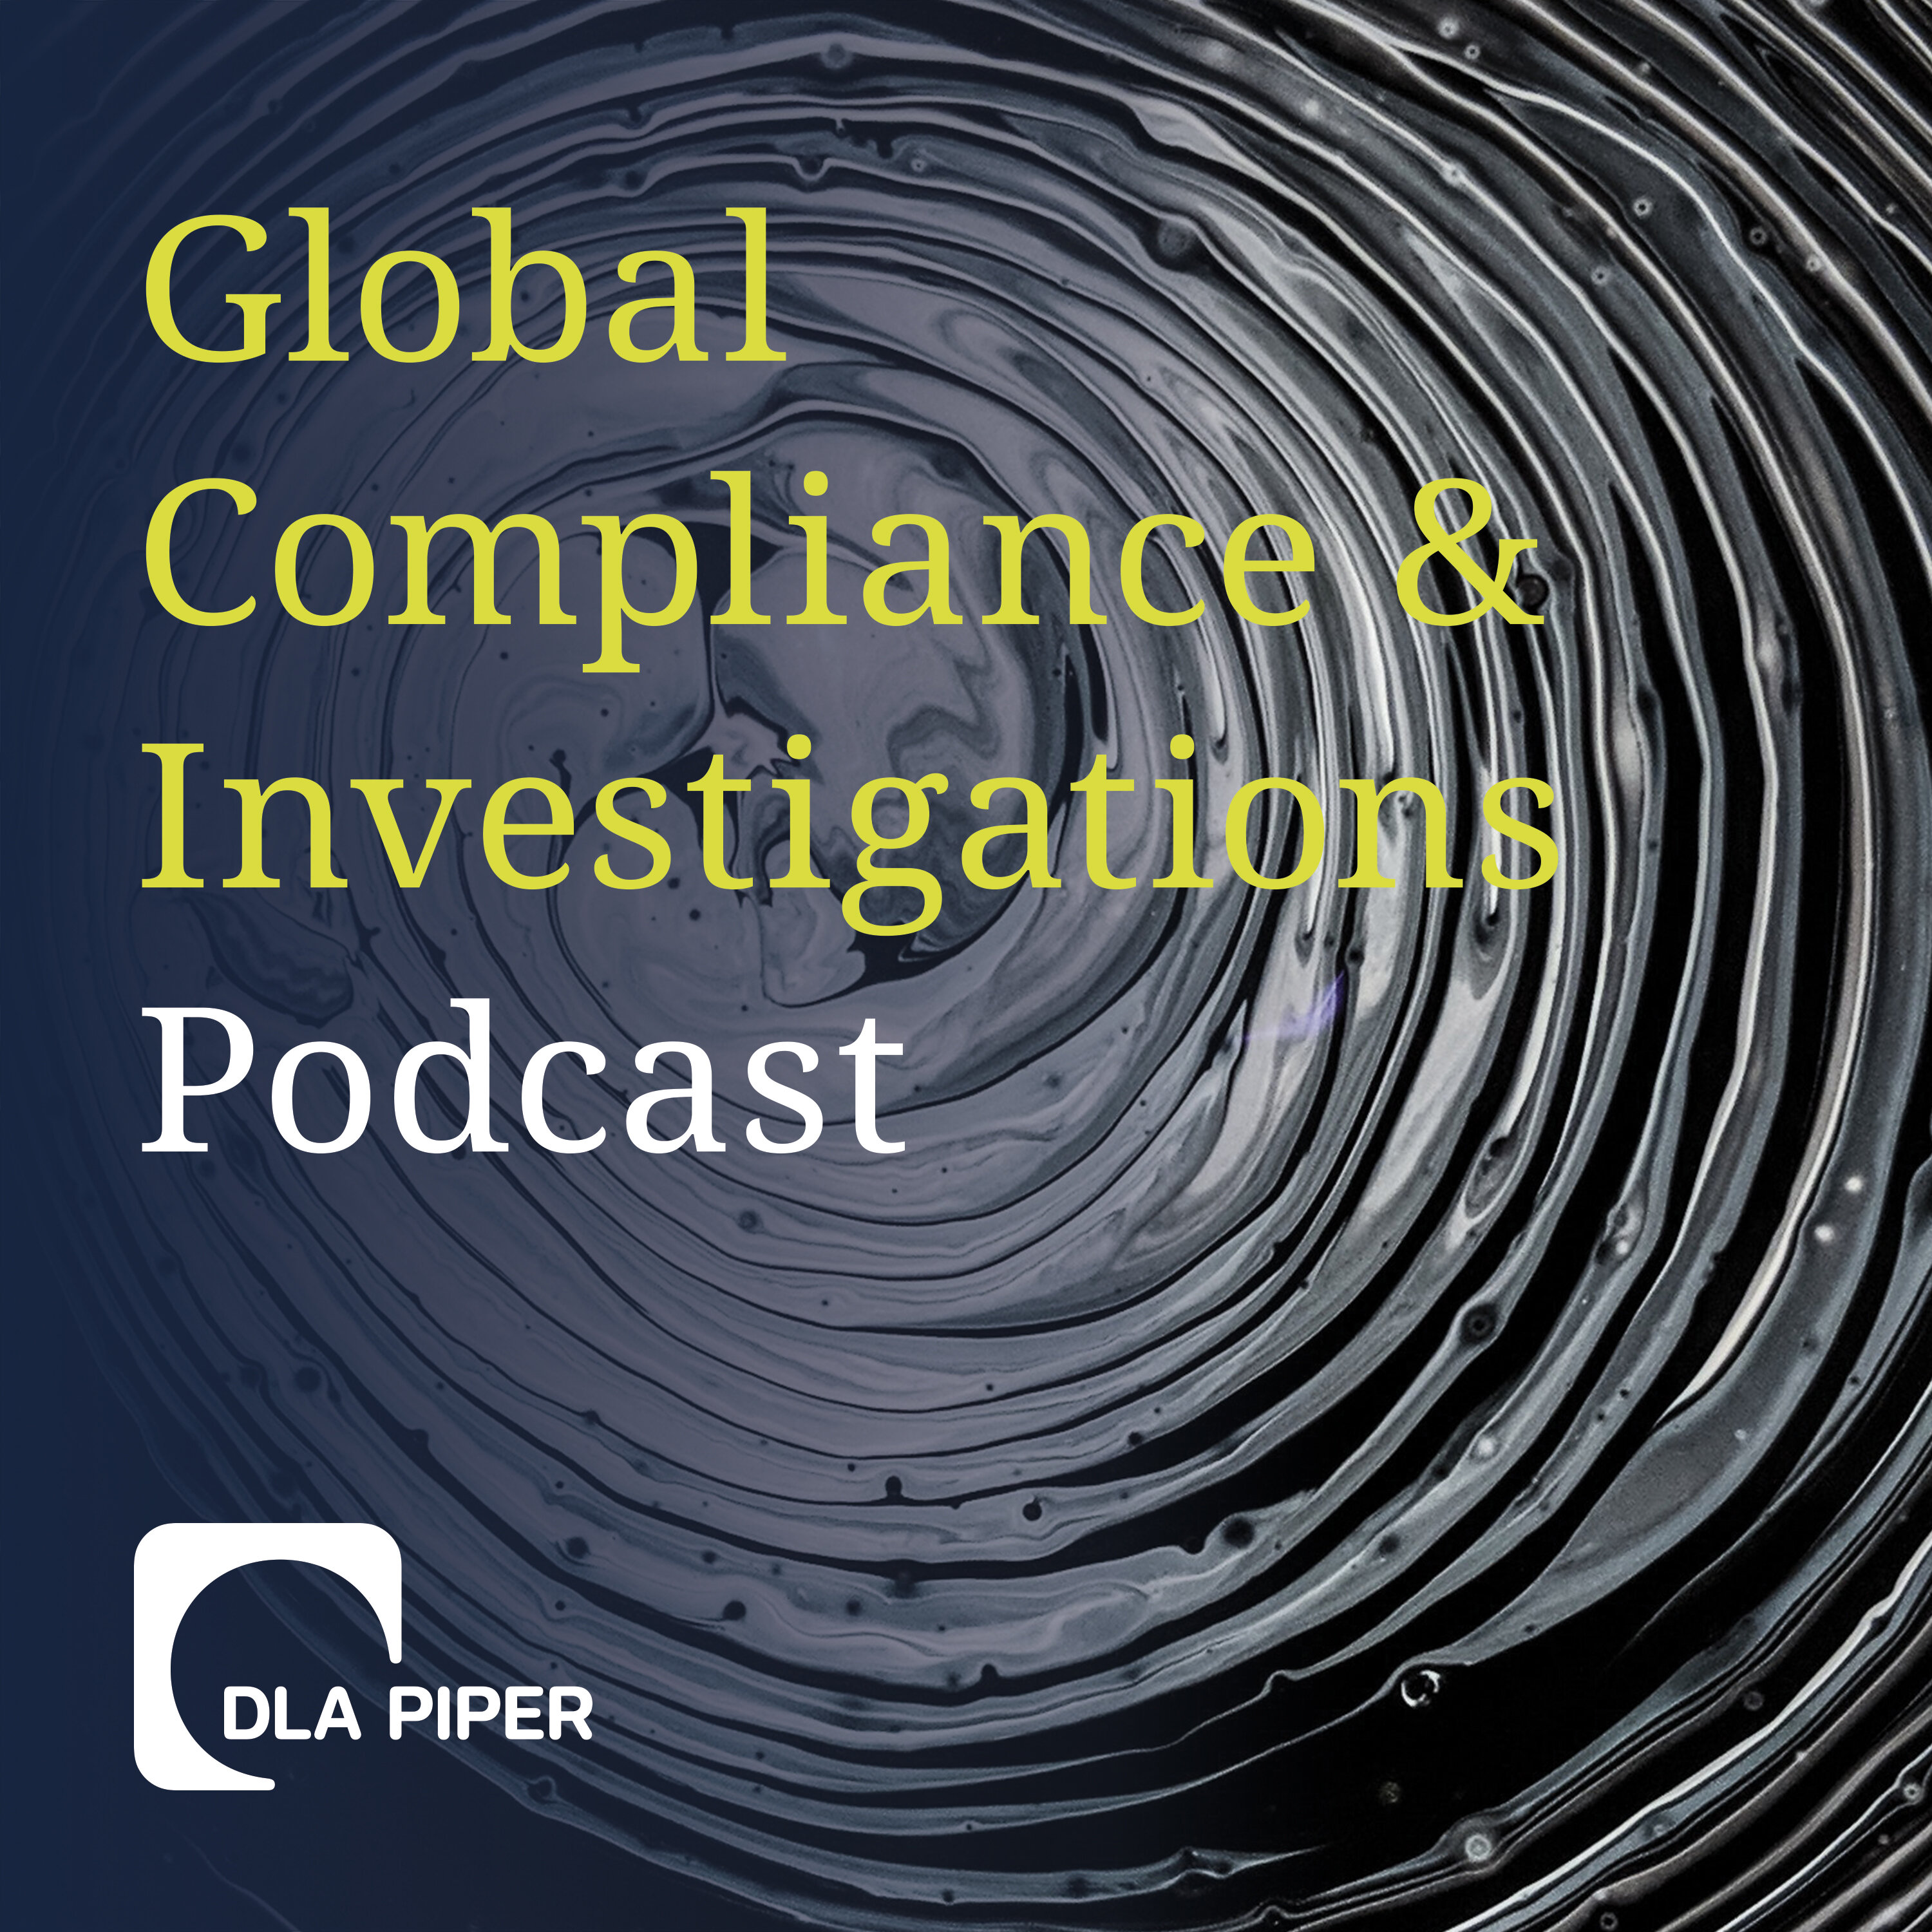 Key trends across the globe in compliance and investigations